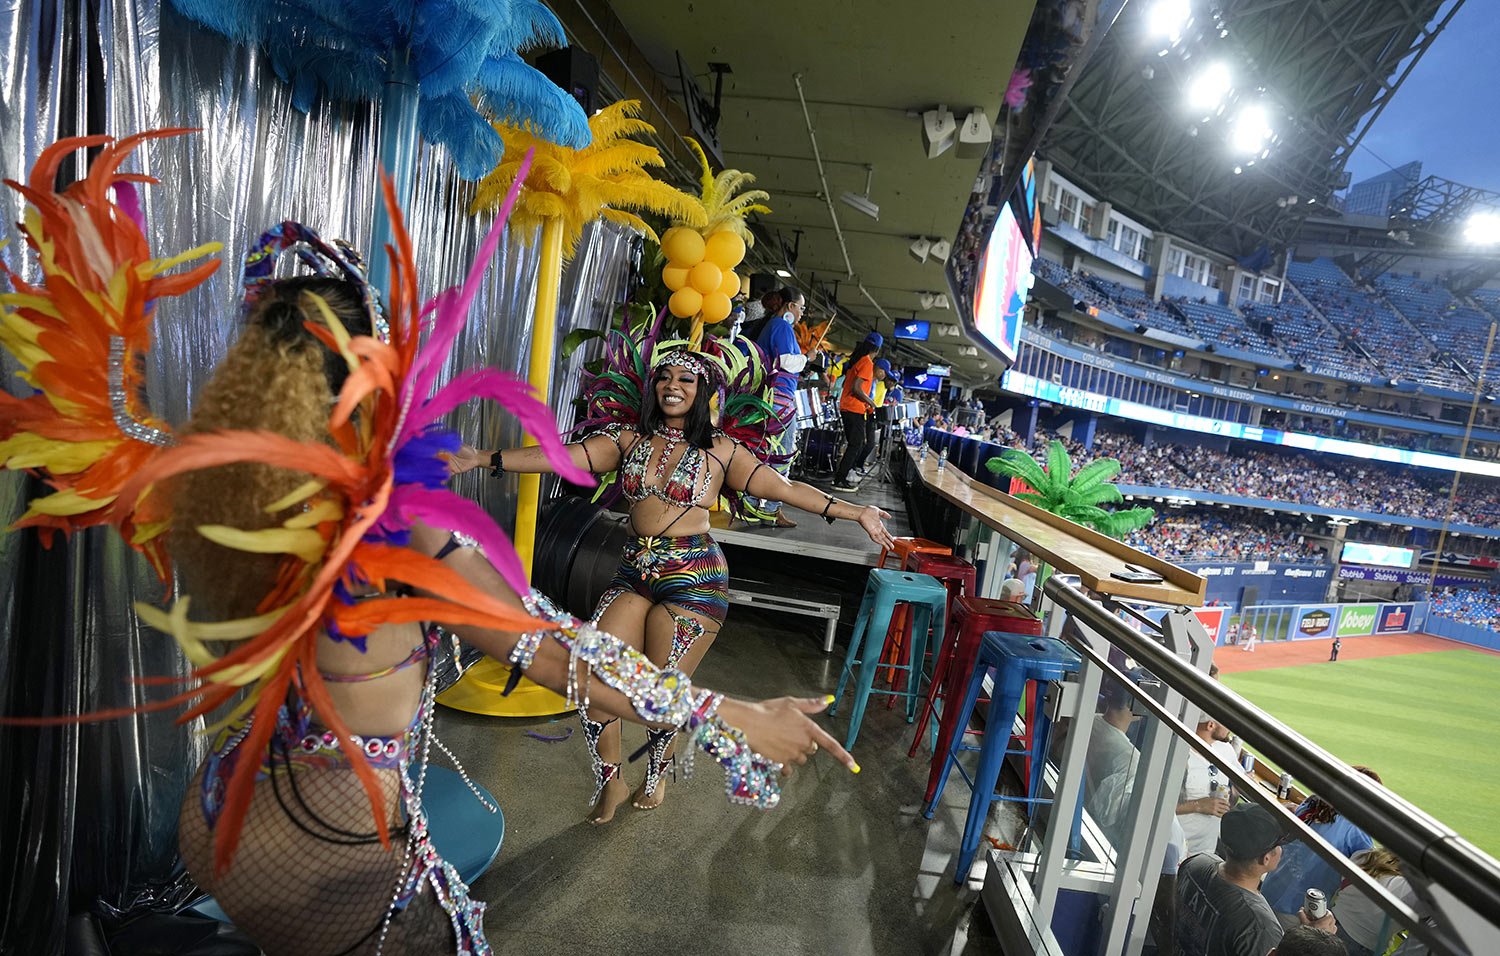  Carnival dancers perform during a break at a baseball game at Rogers Center in Toronto, Canada, Wednesday, July 27, 2022. (AP Photo/Kamran Jebreili) 